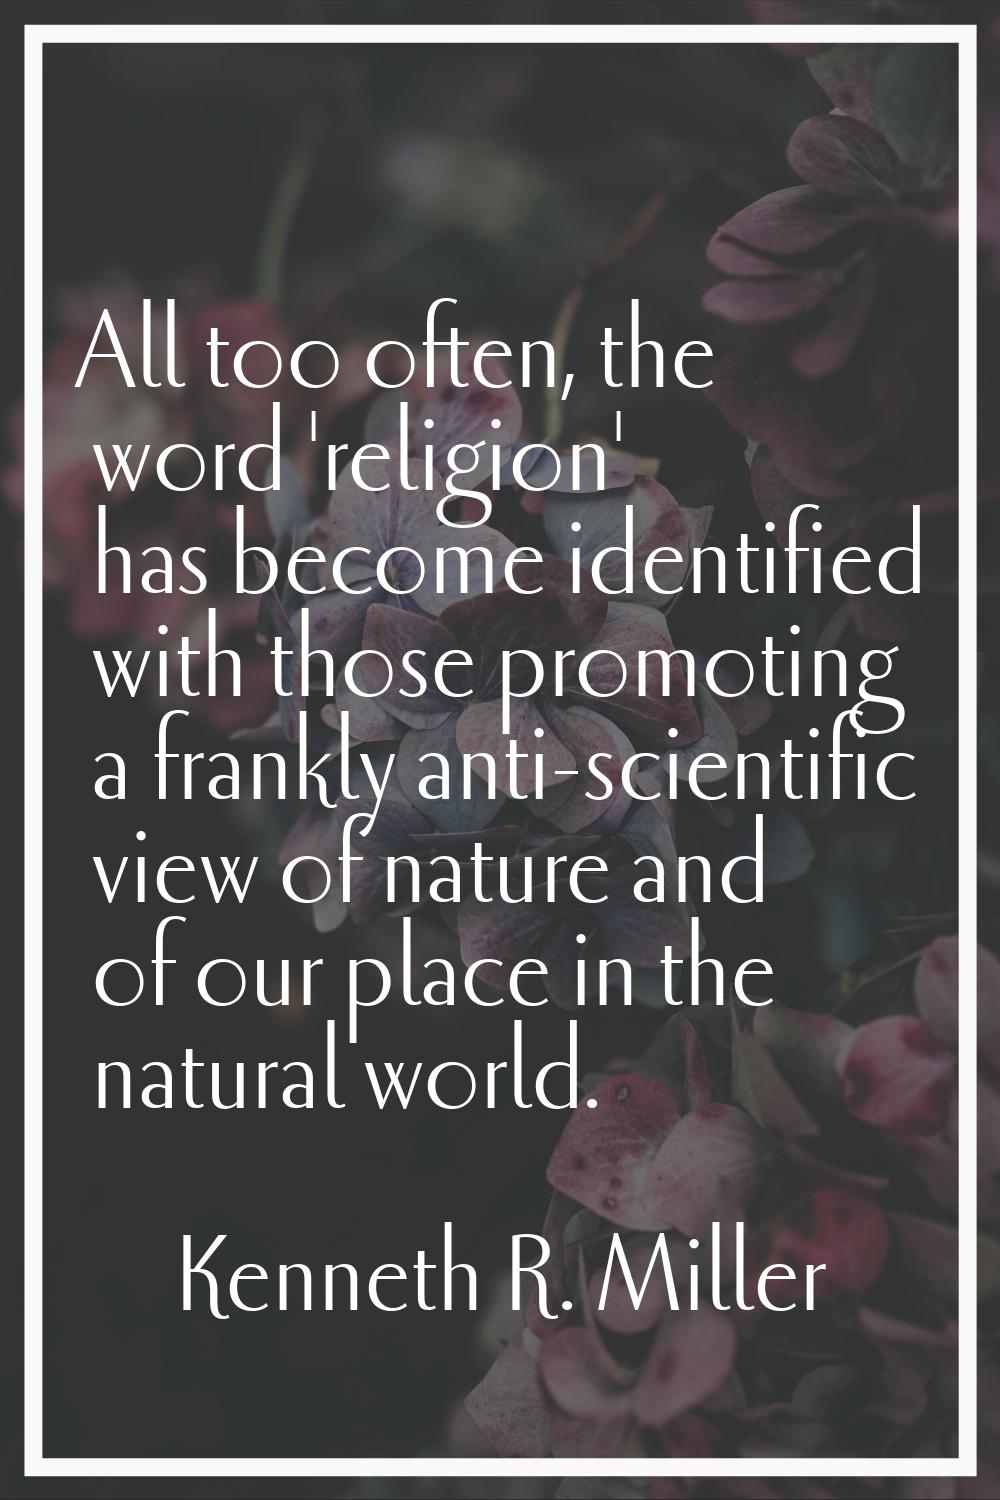 All too often, the word 'religion' has become identified with those promoting a frankly anti-scient